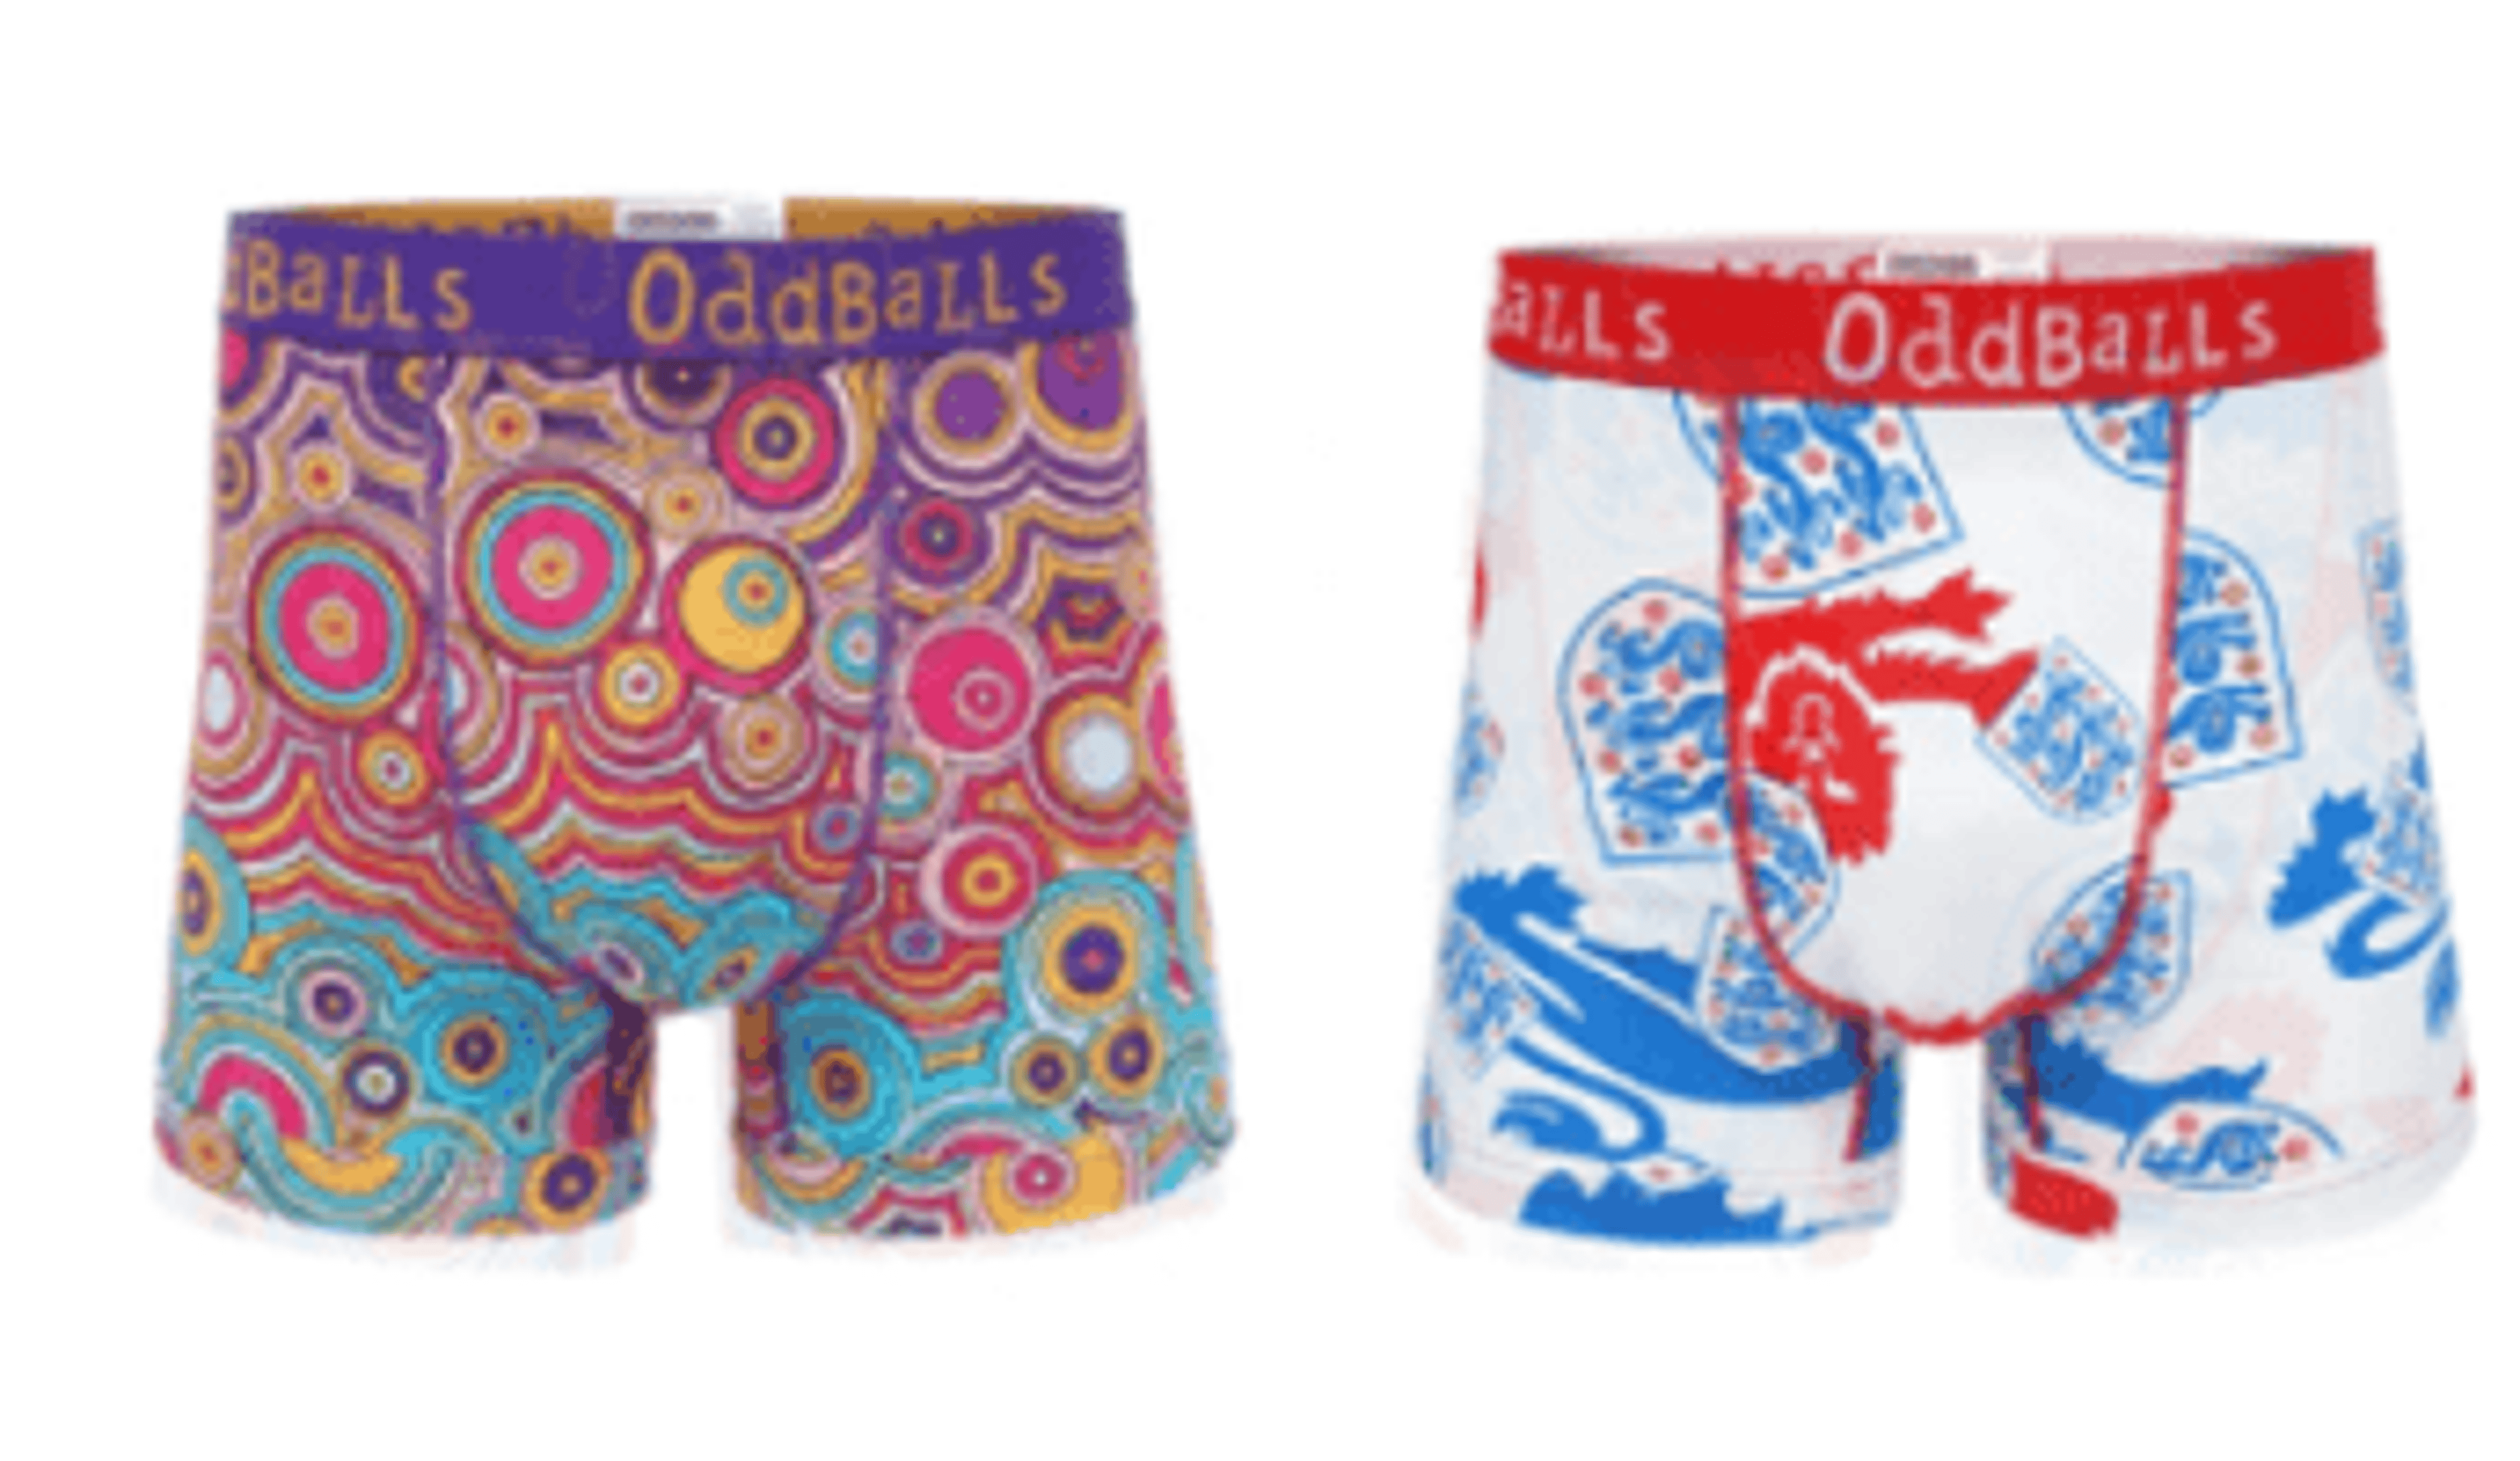  A selection of colourful OddBalls boxers 